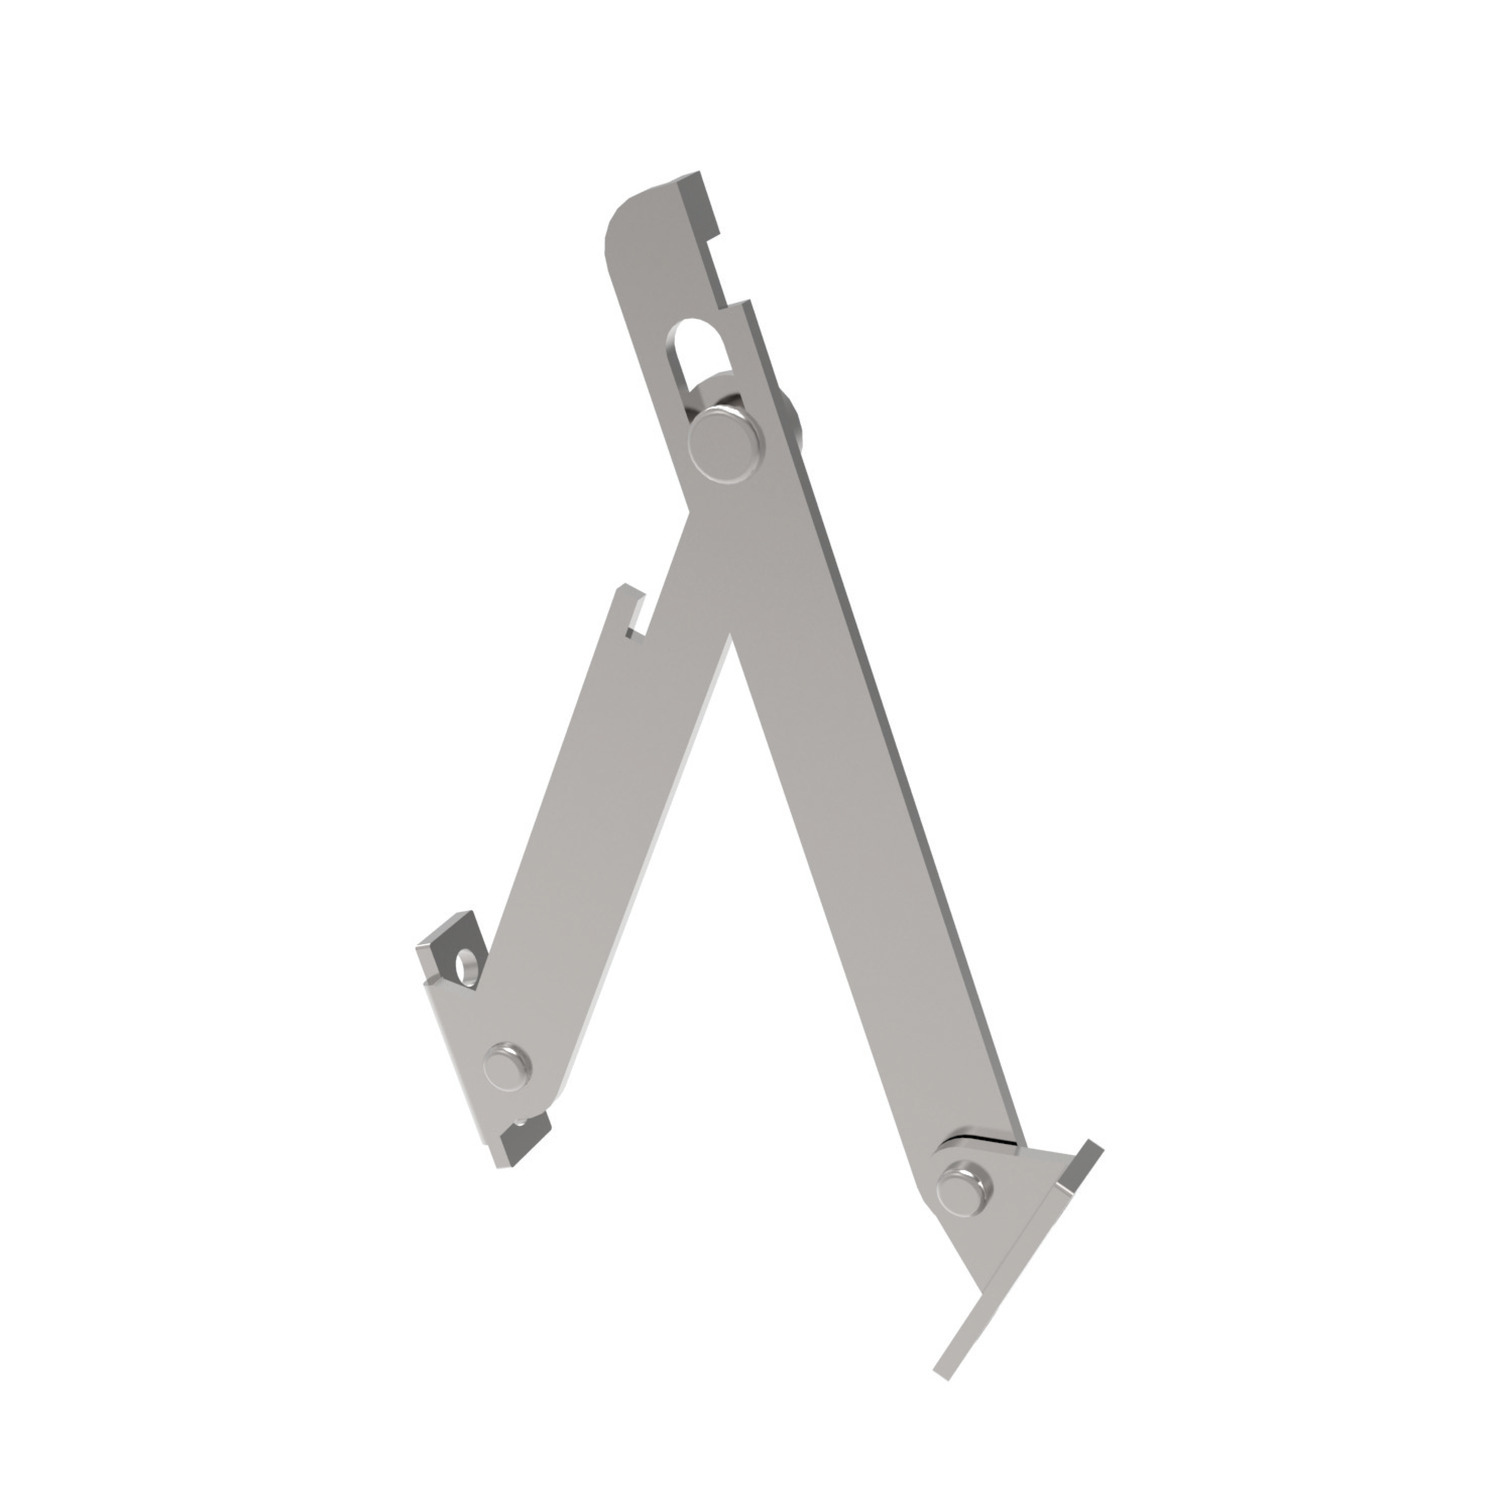 N0954.AC0010 Lid Stays Stainless steel - Right - 292mm.